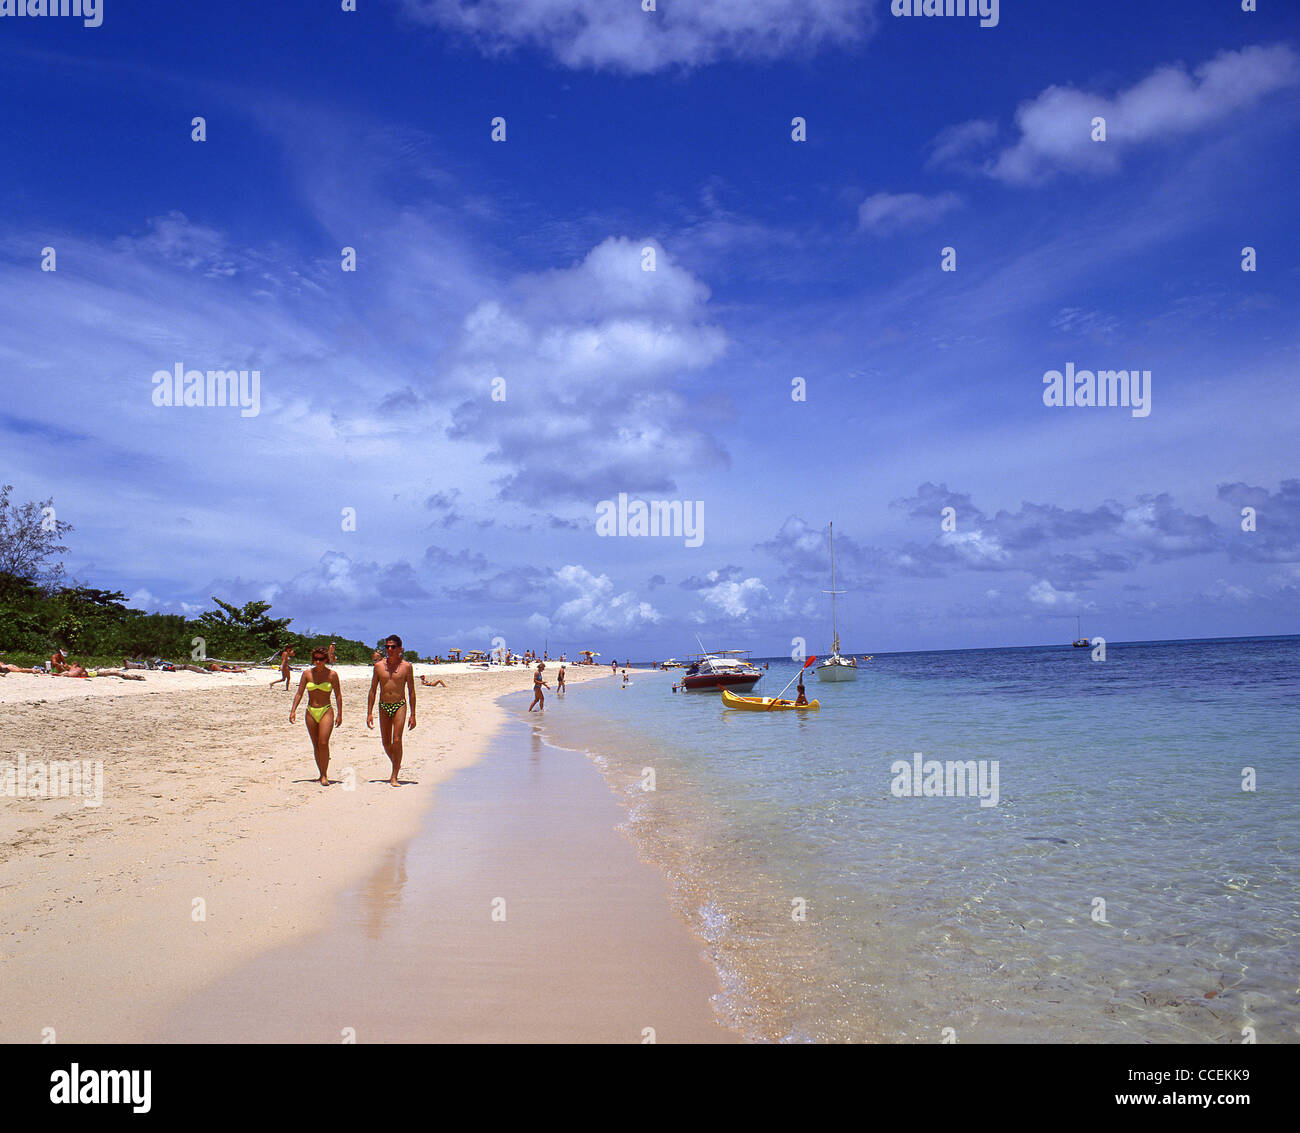 Couple marchant sur Coral Cay Reinfern Beach, Green Island, Great Barrier Reef Marine Park, Queensland, Australie Banque D'Images